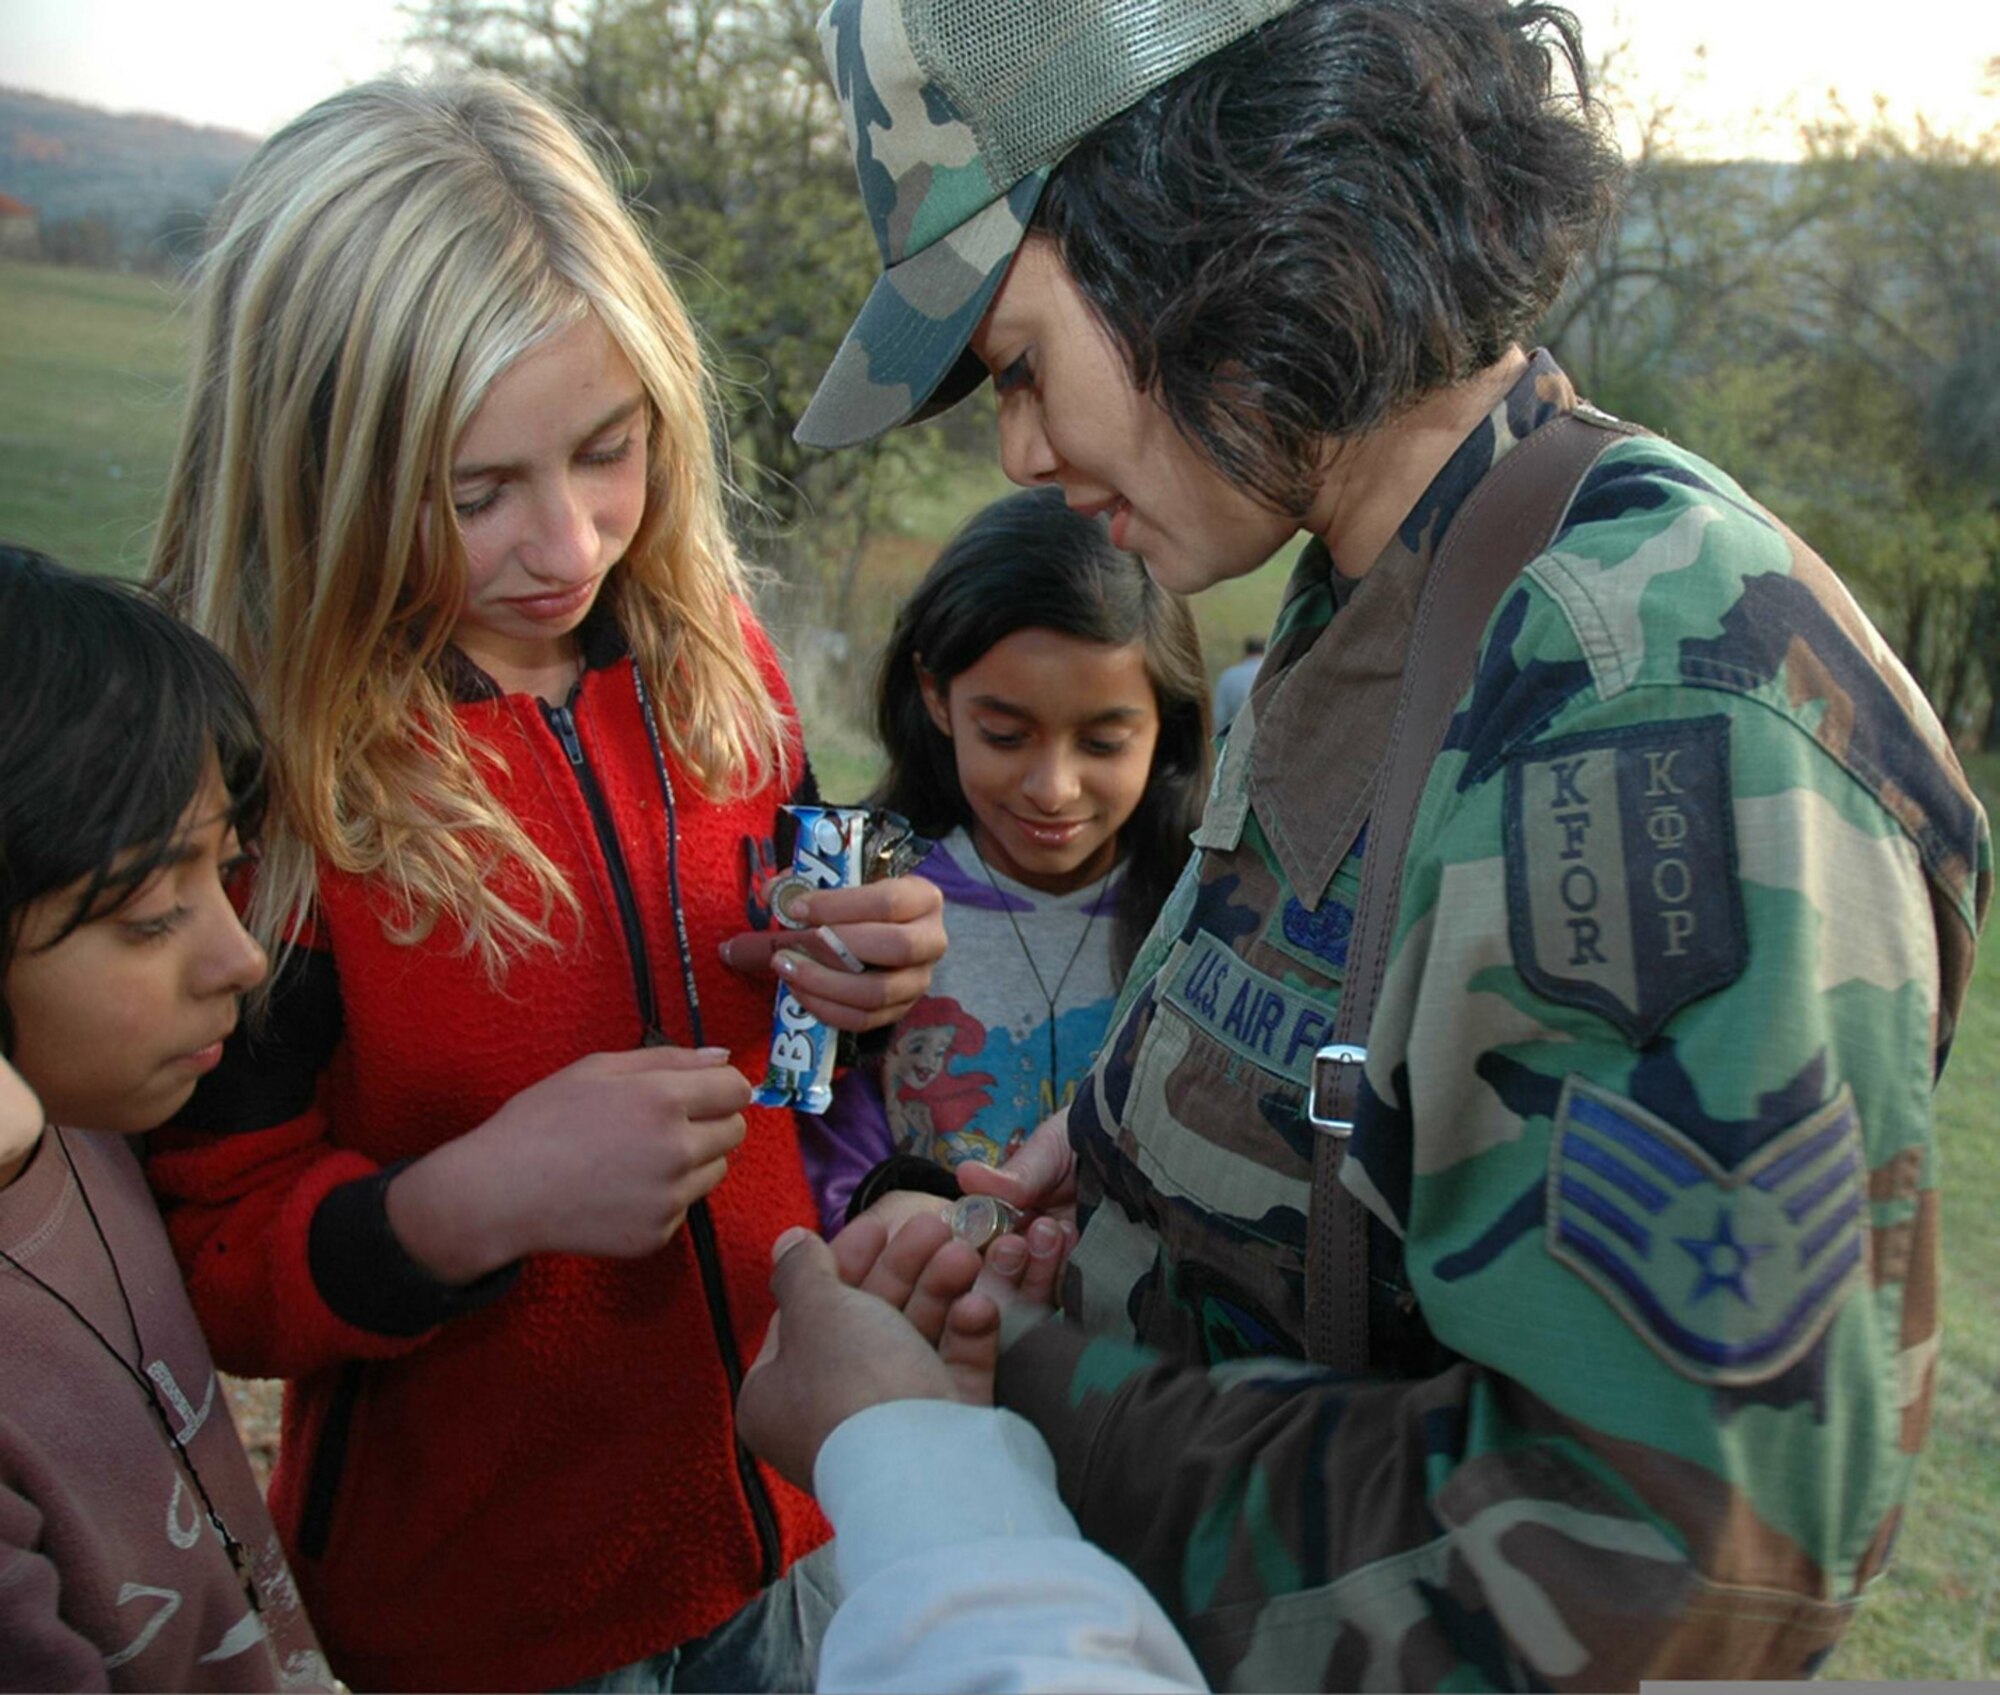 NOVO BRDO, Kosovo (AFPN) -- Children gather around Staff Sgt. Shannon Millard as she hands out coins and candy during a humanitarian mission in the Novo Brdo region of Kosovo. Shannon Millard is a contract specialist deployed from Cannon Air Force Base, N.M. (Ukranian Army photo by 1st Lt. Maksym Nedria)